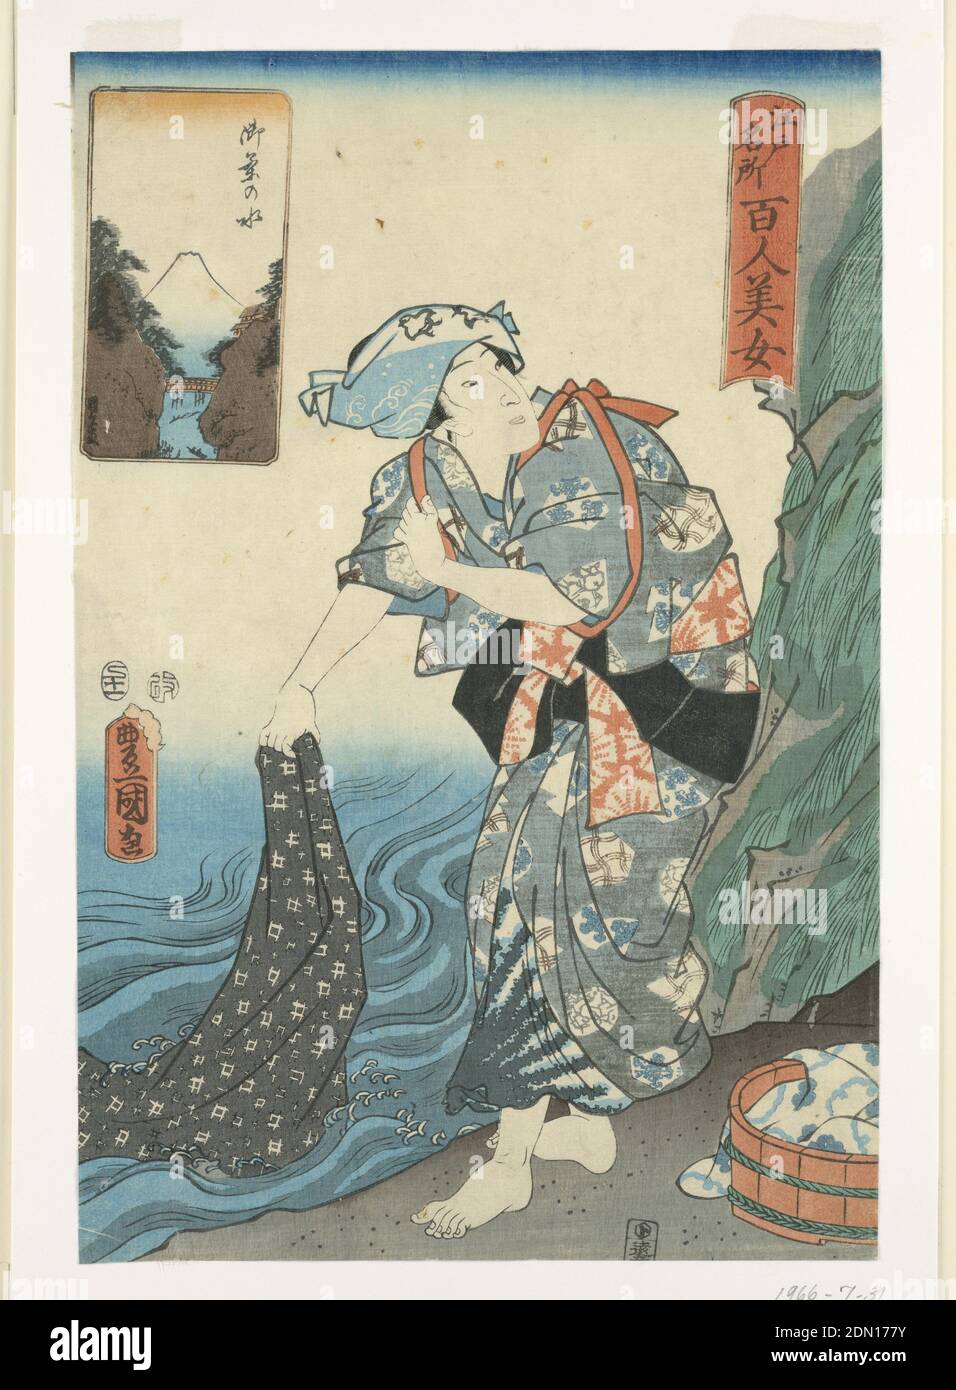 Woman washing fabric in a stream, Utagawa Kunisada, Japanese, 1786 – 1864, Woodblock print in colored ink on paper, This artisan, decorated in various designs, is rinsing a textile in the water. While her garments are mainly designed using shibori and bingata techniques, katazome was implemented to create the abstract checkered print. Behind her is another fabric that contains two tones of indigo blue. A cartoon in the top left shows a clear image of the grand Mount Fuji., Japan, 1857, theater, Print Stock Photo